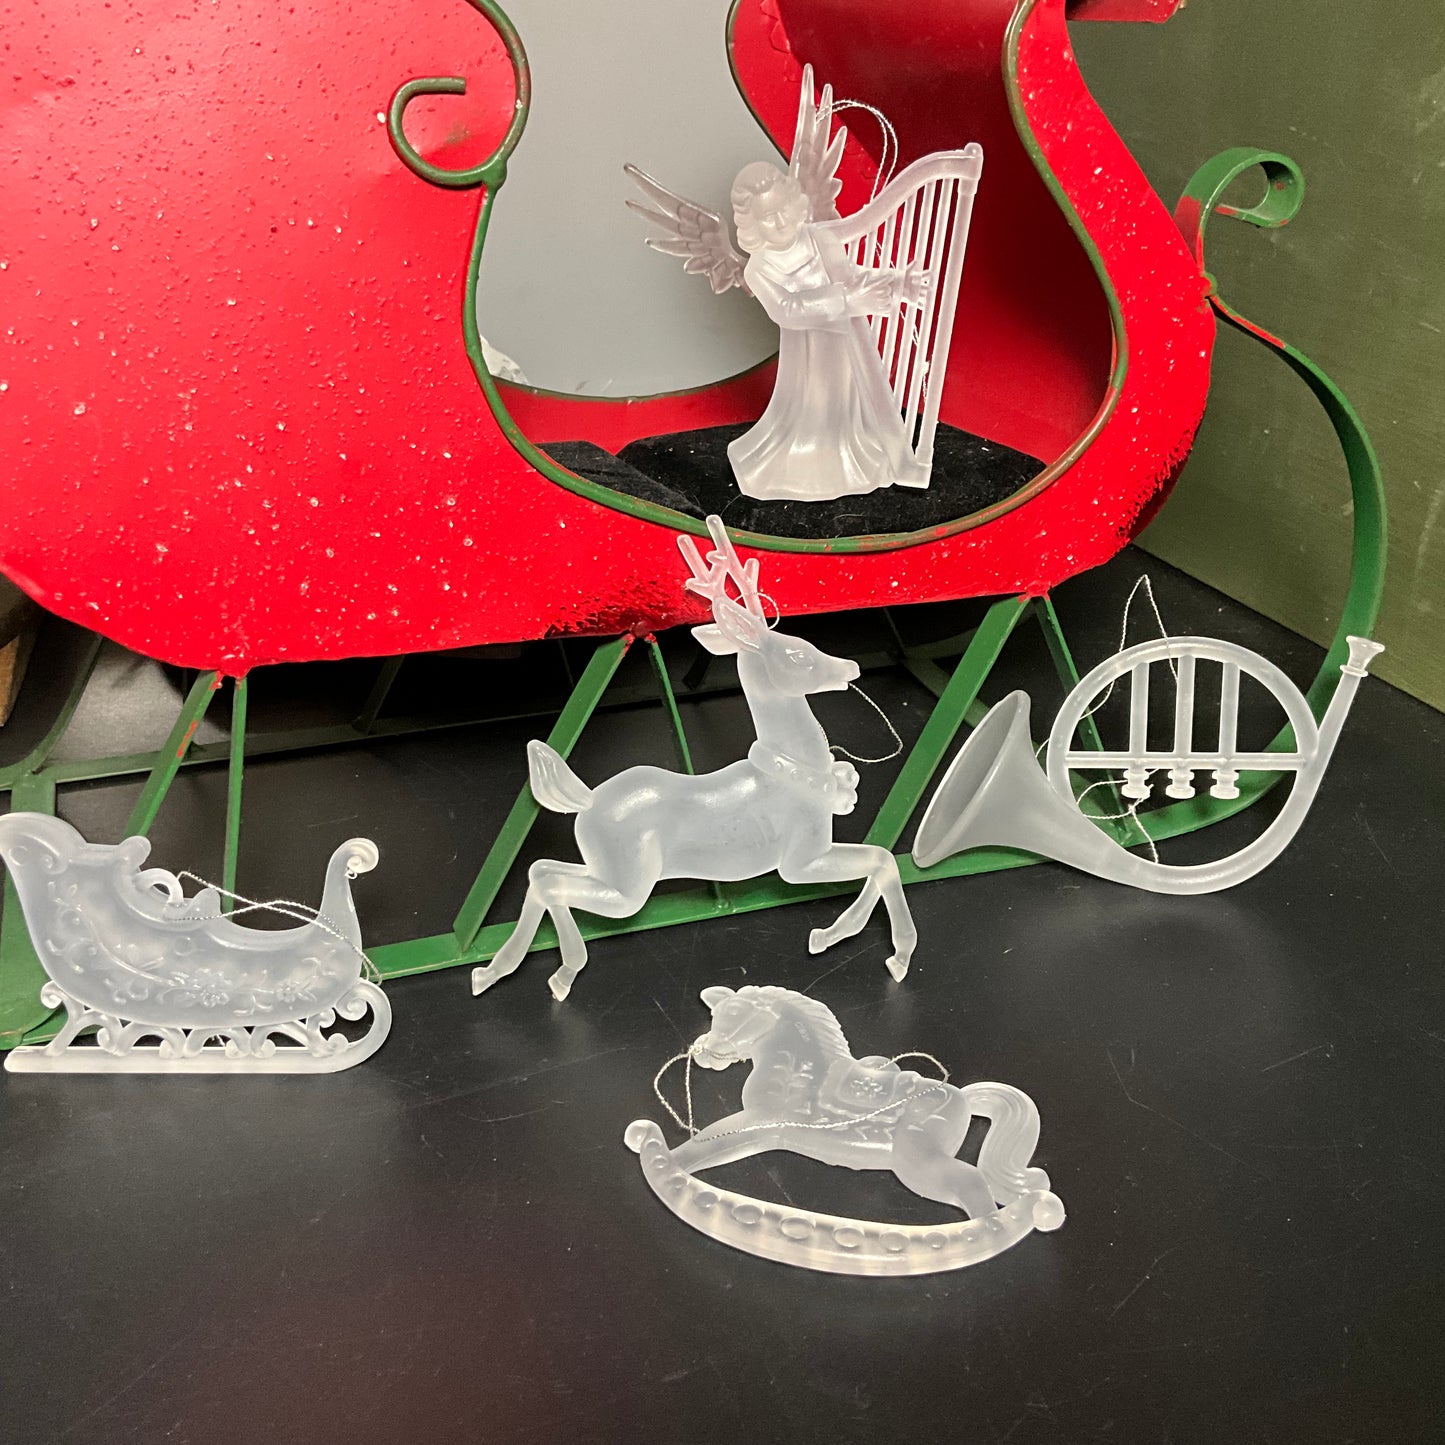 Fabulas frosted acrylic set of 5 vintage Christmas ornaments see description*